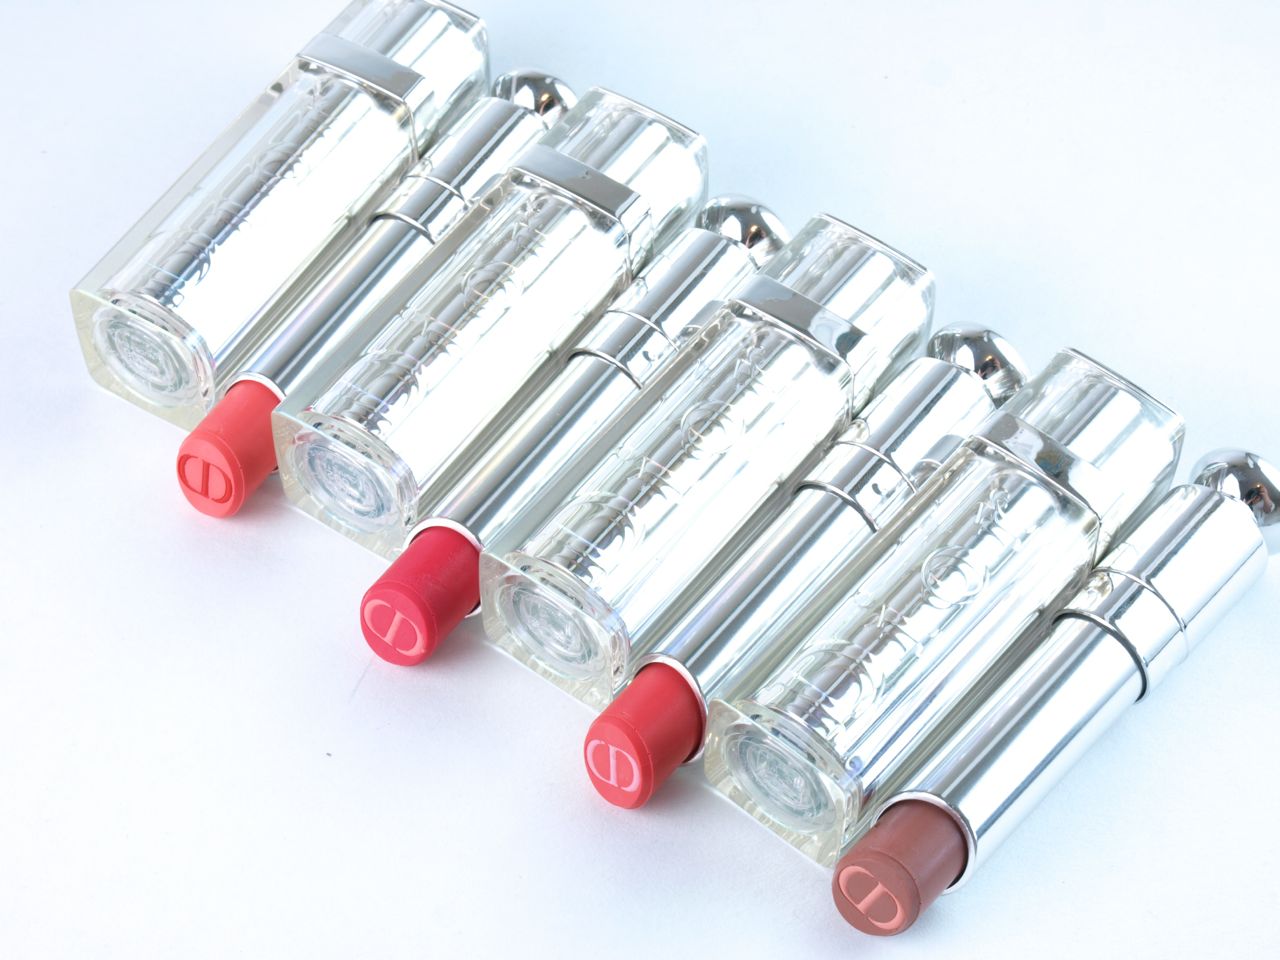 Dior Summer 2015 Tie Dye Collection Dior Addict Tie Dye Lipsticks: Review and Swatches